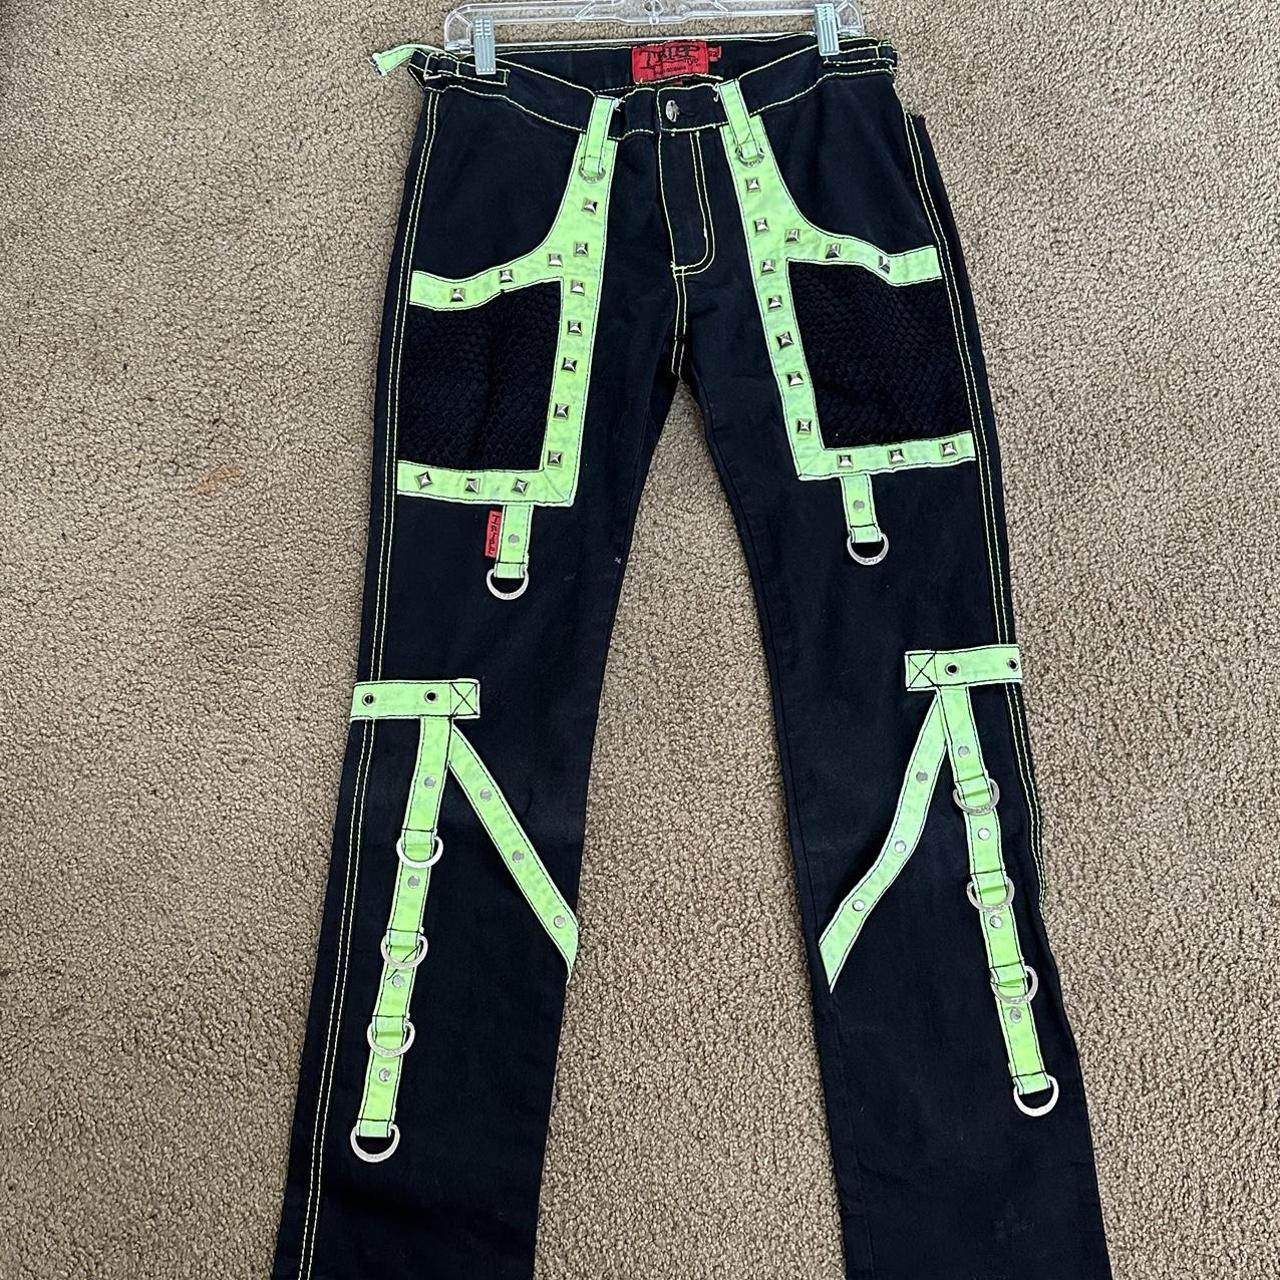 Tripp nyc lime green pants These are a men's style - Depop